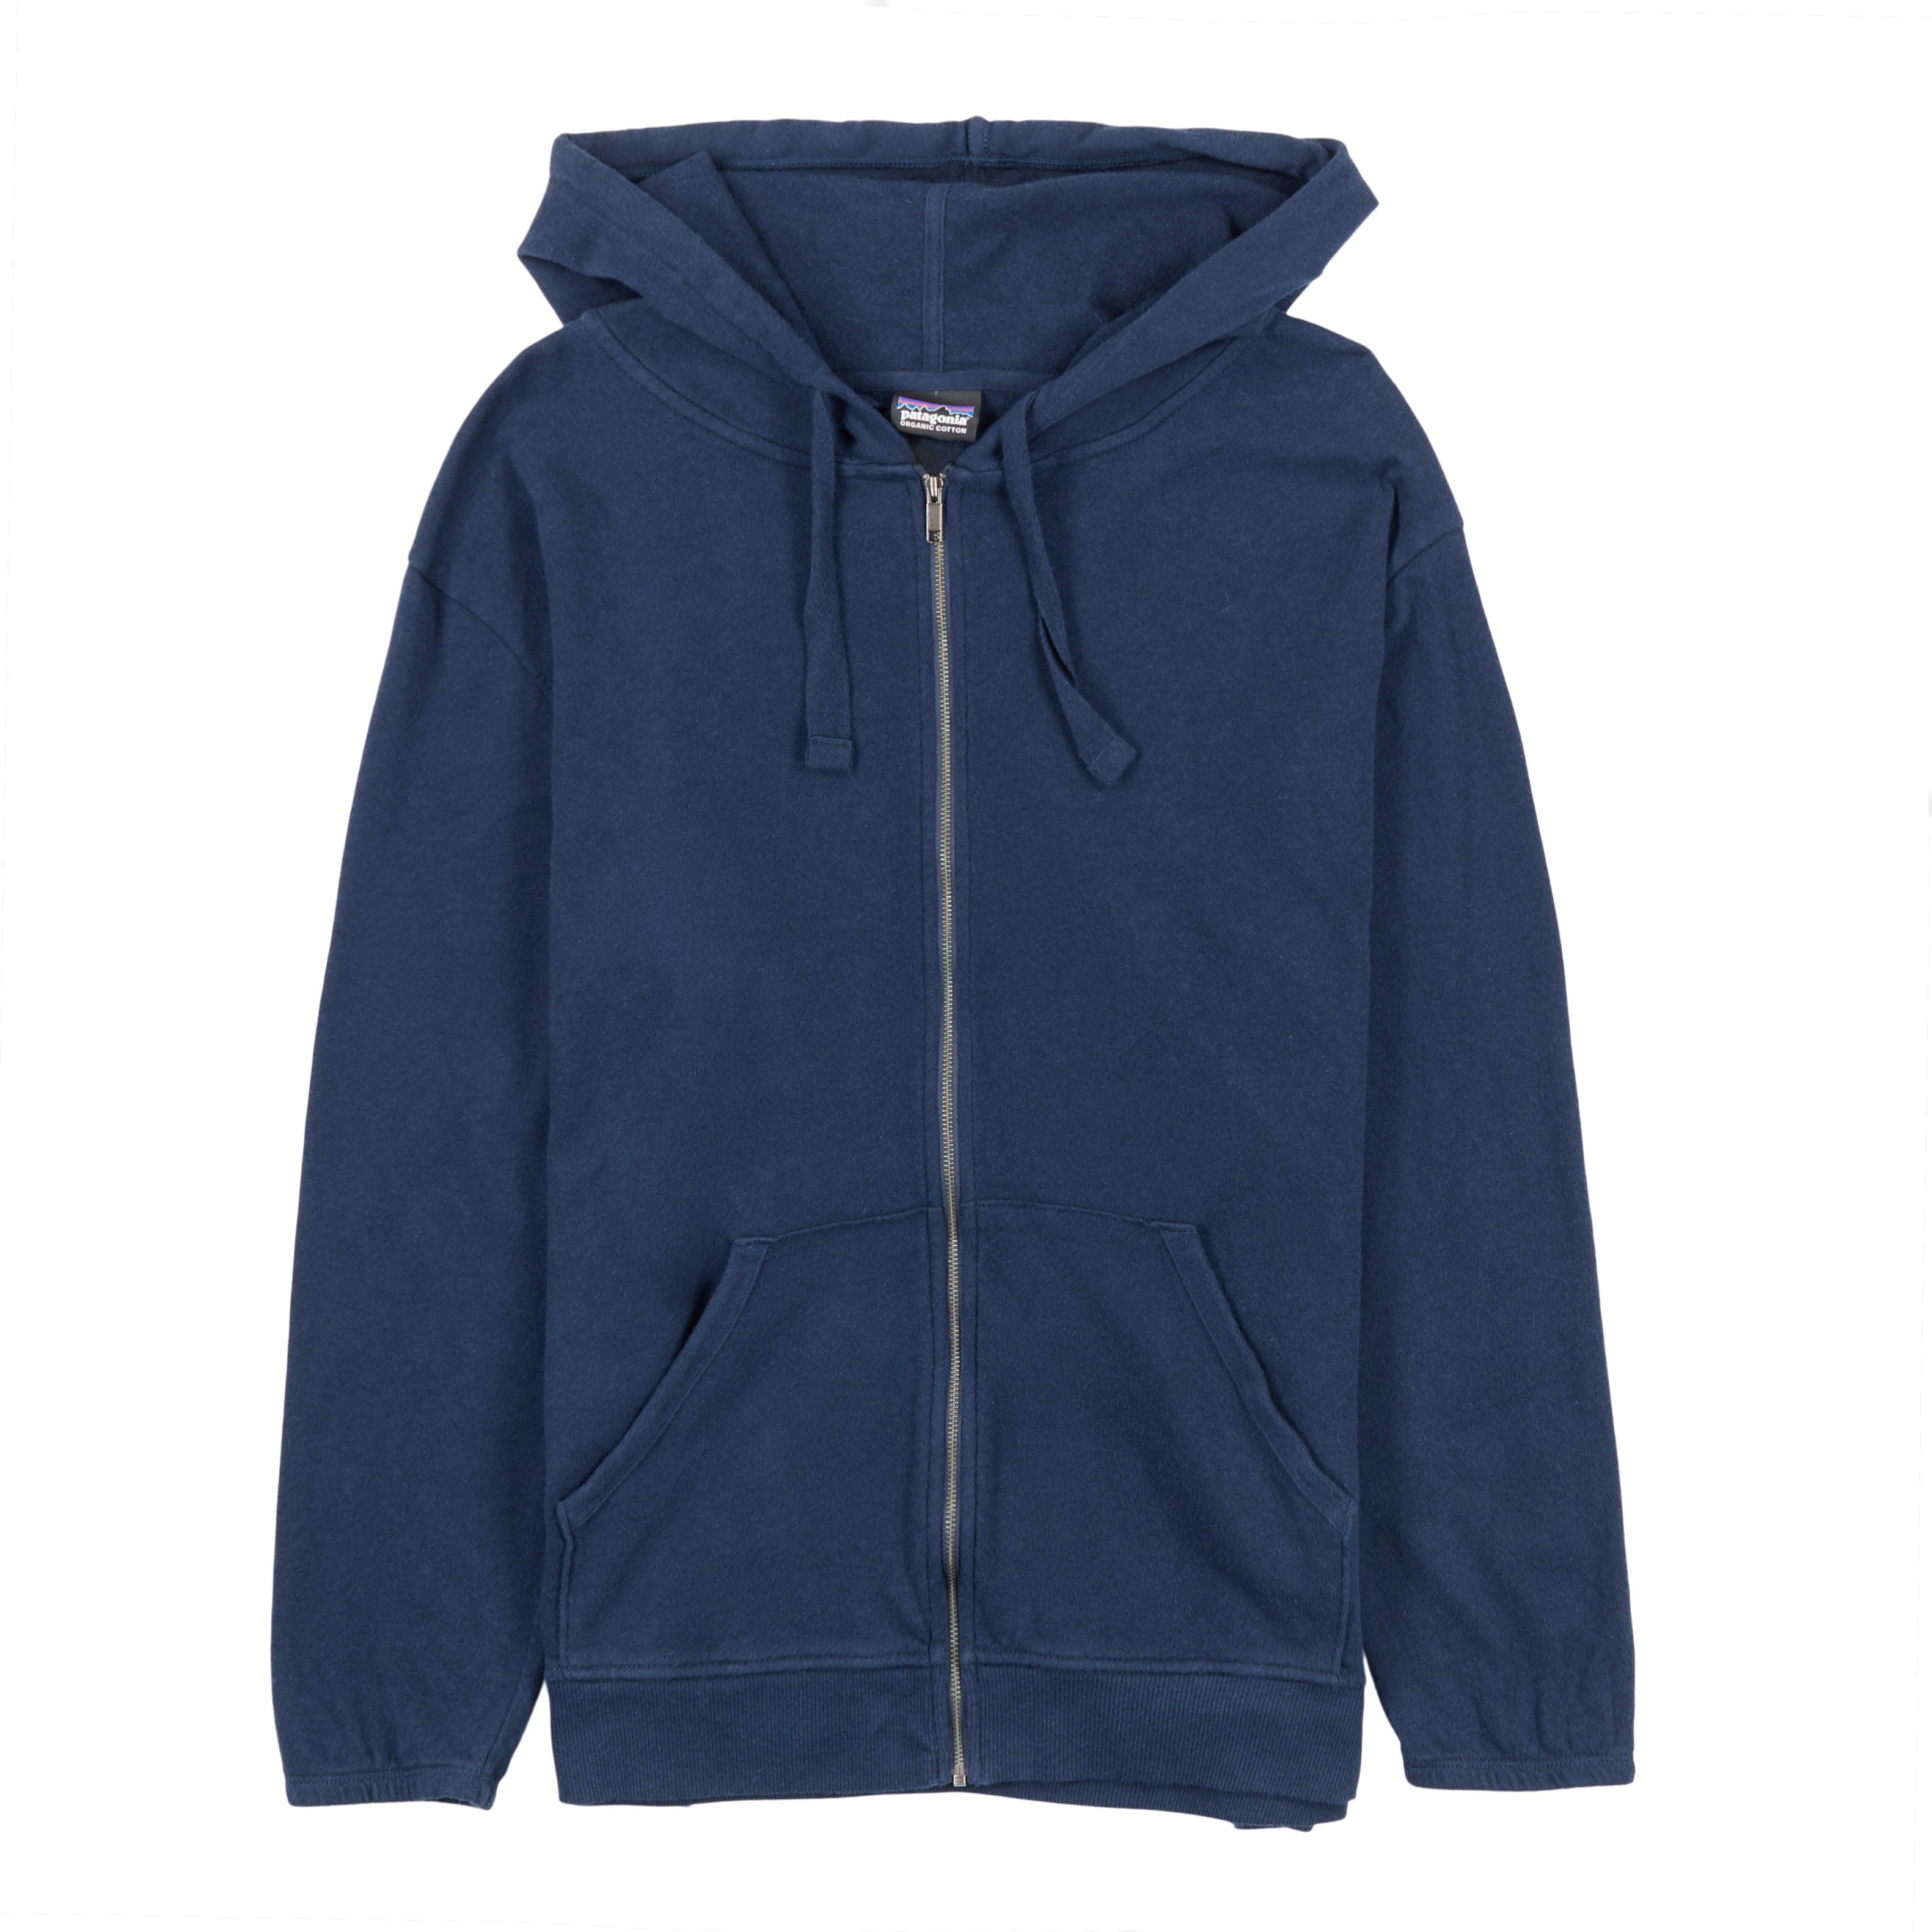 W's Organic Cotton French Terry Hoody